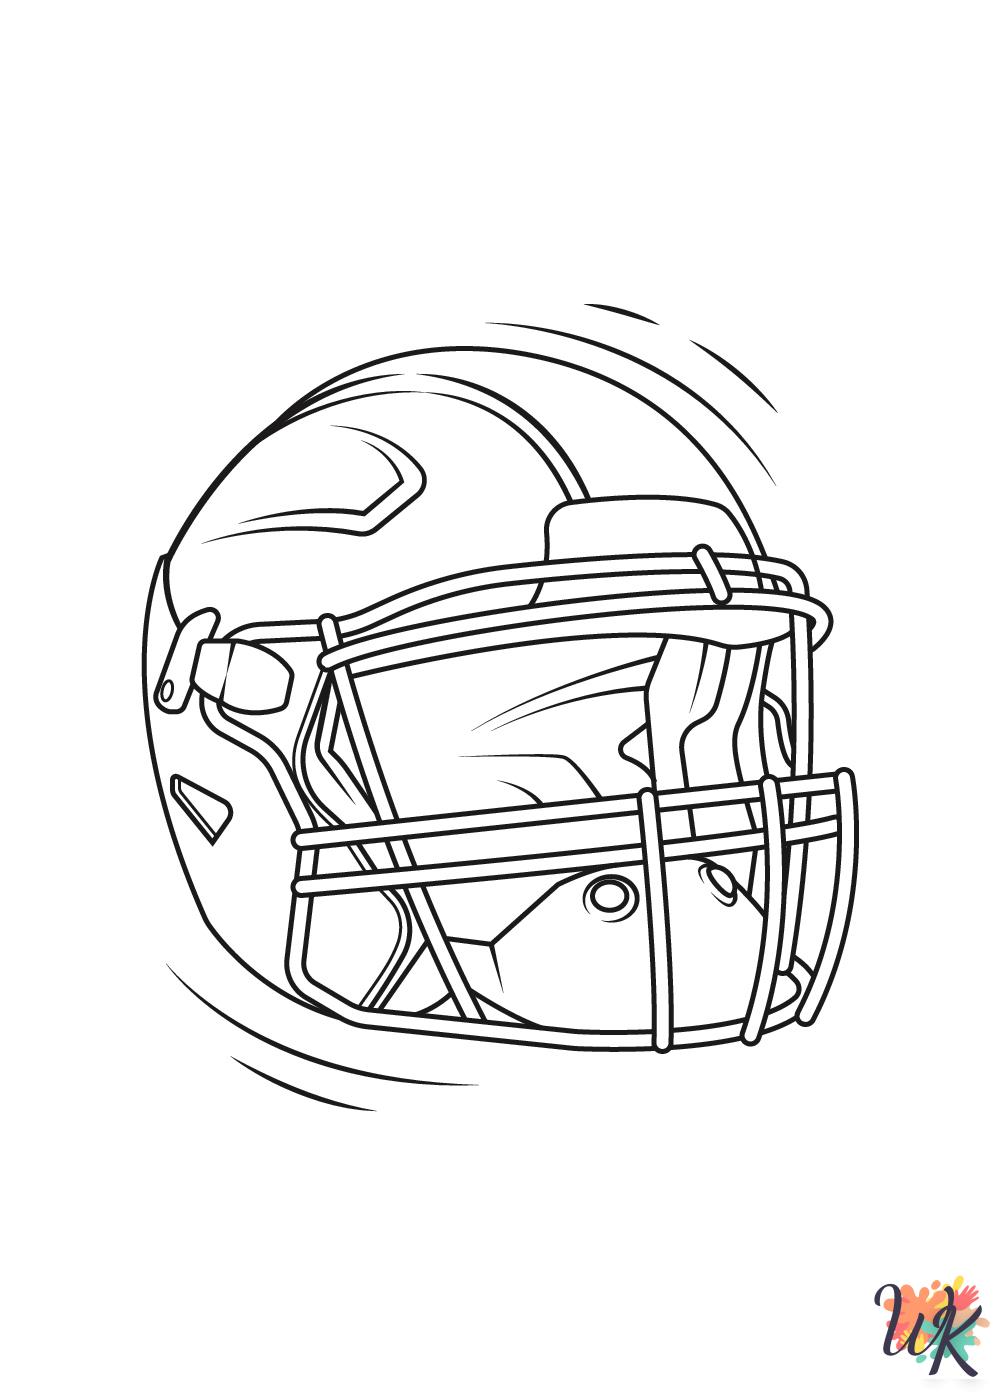 NFL Coloring Pages 5